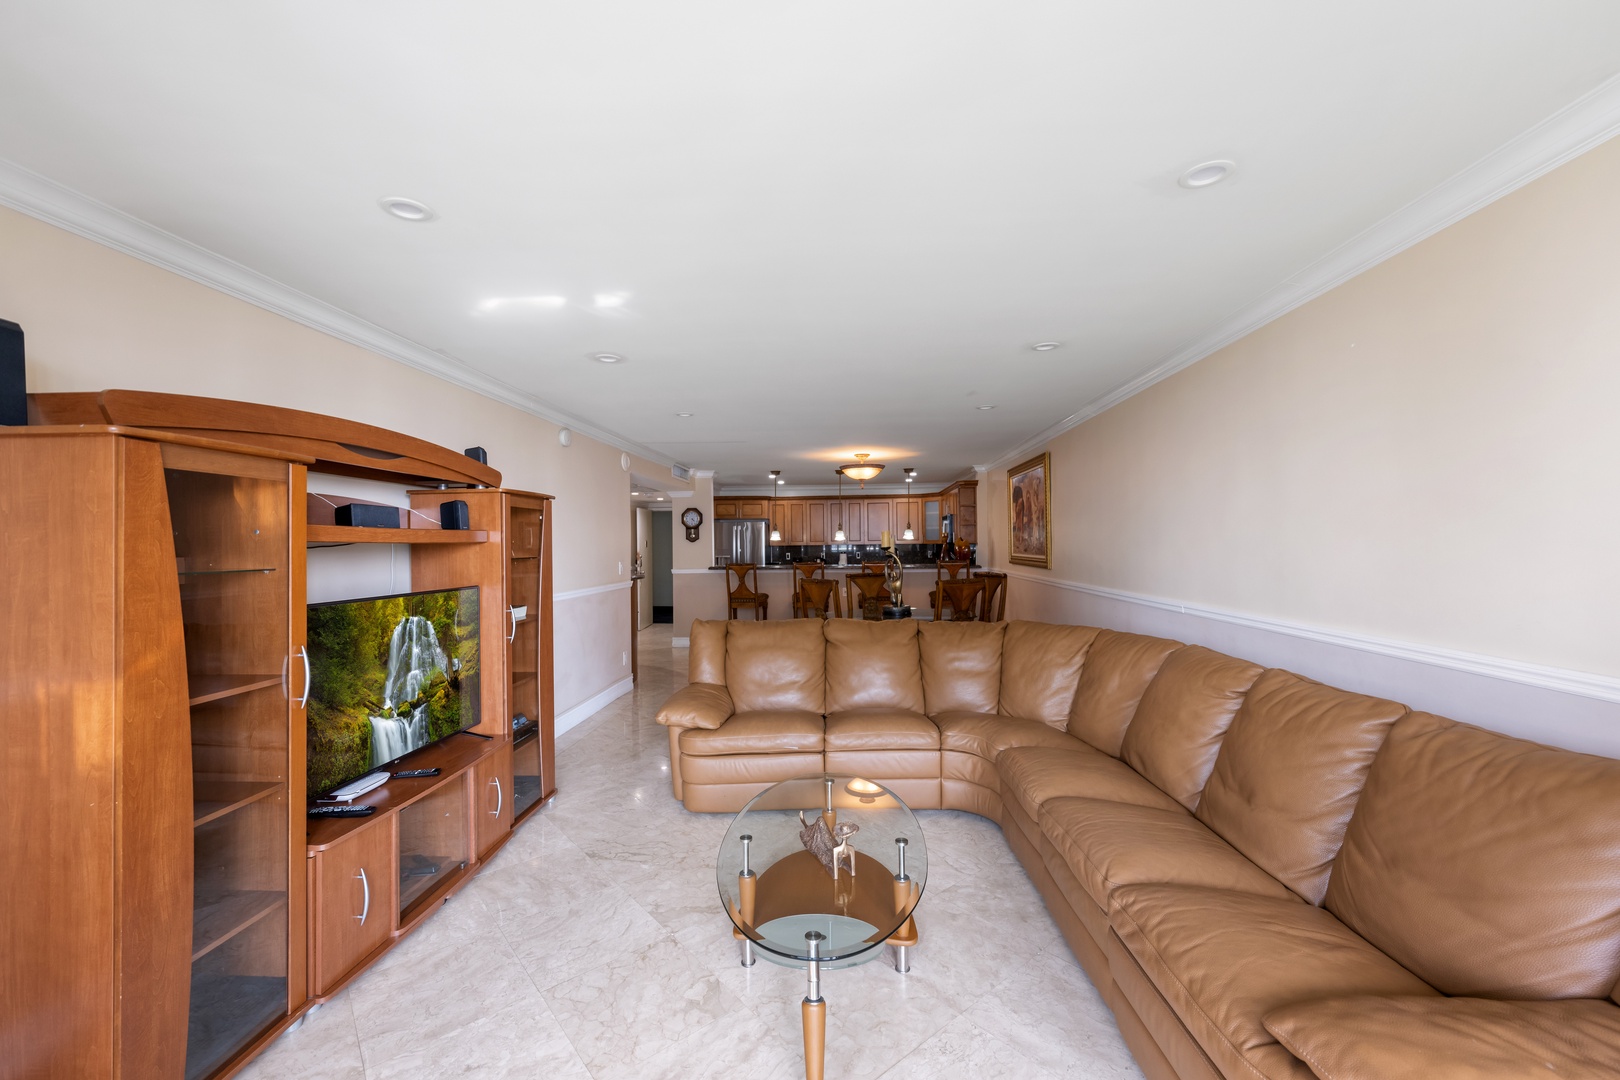 Relax in the spacious living space with a sectional sofa and TV